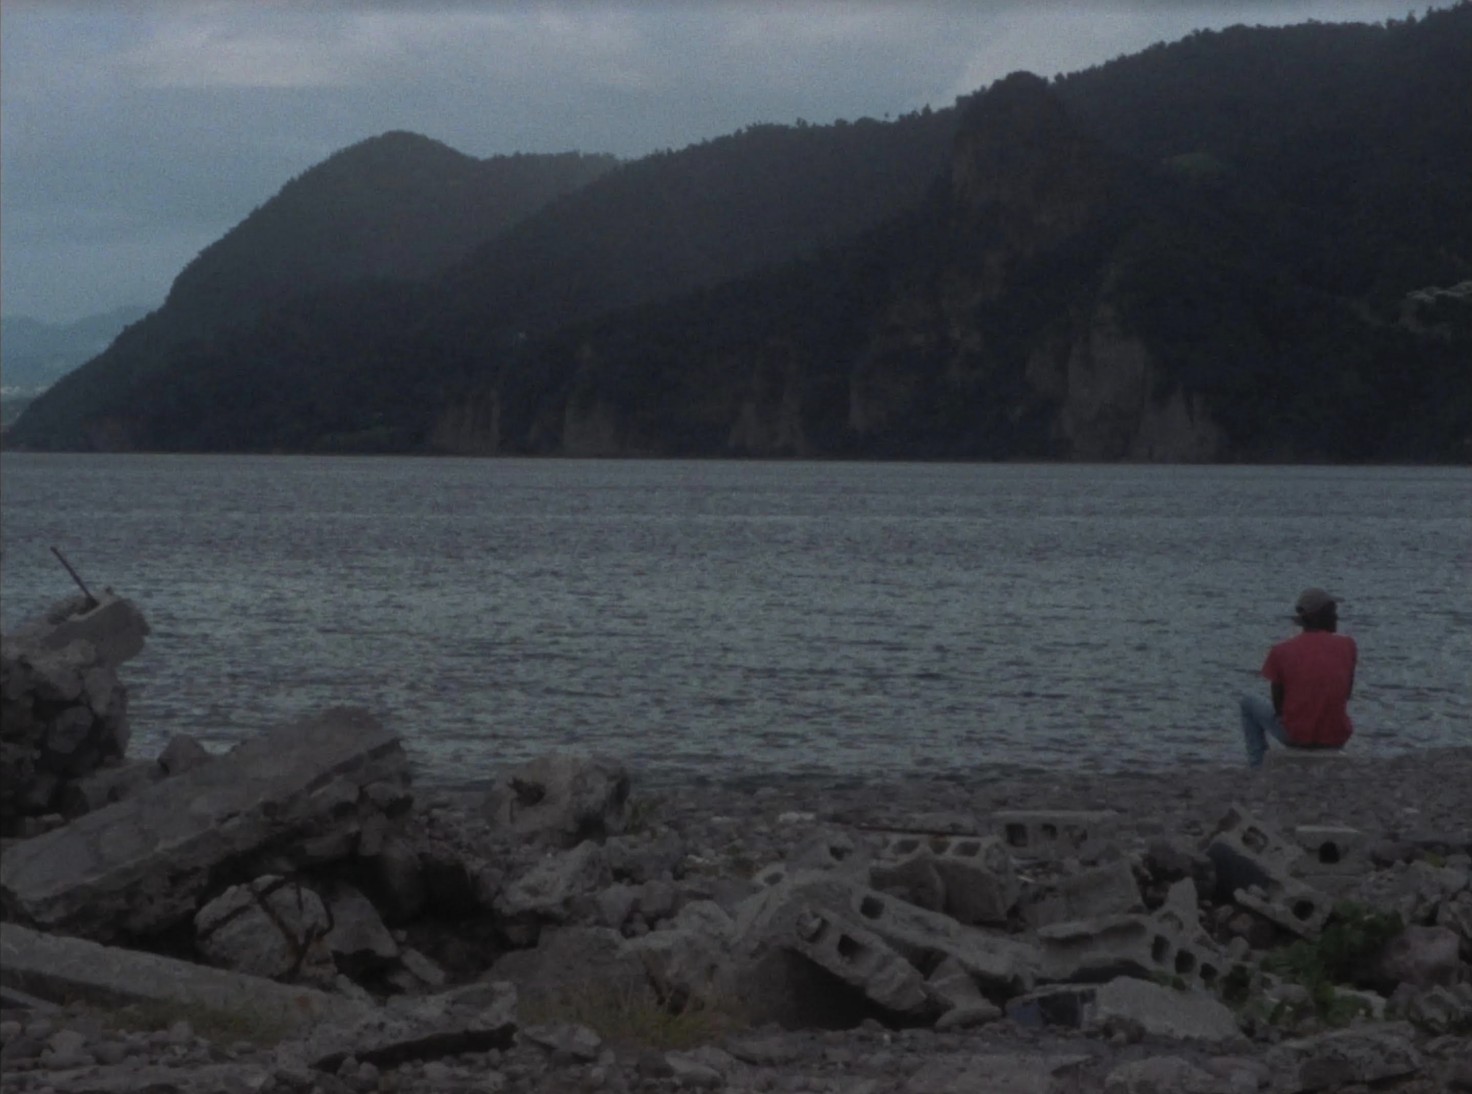 Still from film Chanson for le Nouveau Monde (Song for the New World) directed by Miryam Charles. A landscape of the water, with a figure on the far right in the mid ground.